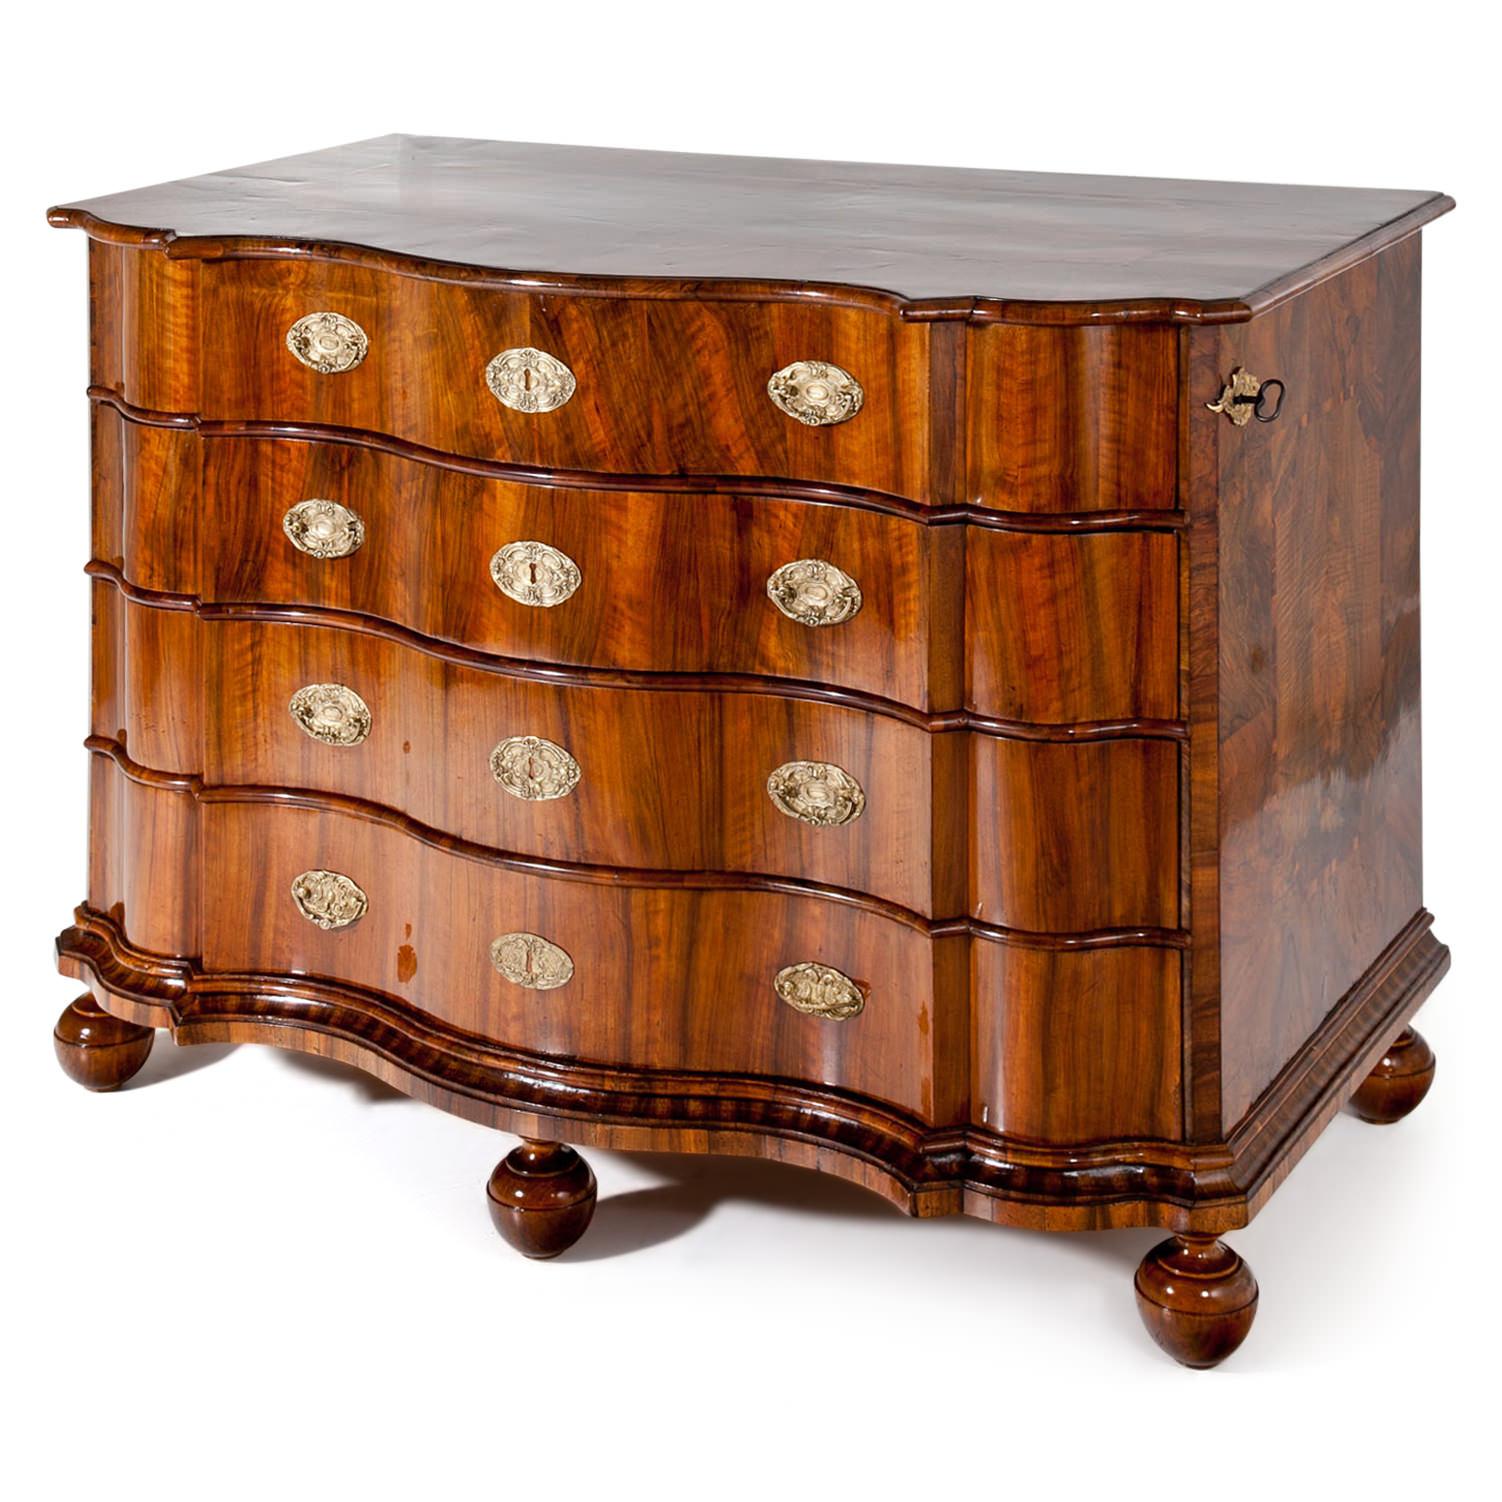 Baroque chest of drawers with a serpentine front, standing on ball feet. The four drawers can be locked on the right side, the key exists. The commode is in a hand-polished and refurbished condition.